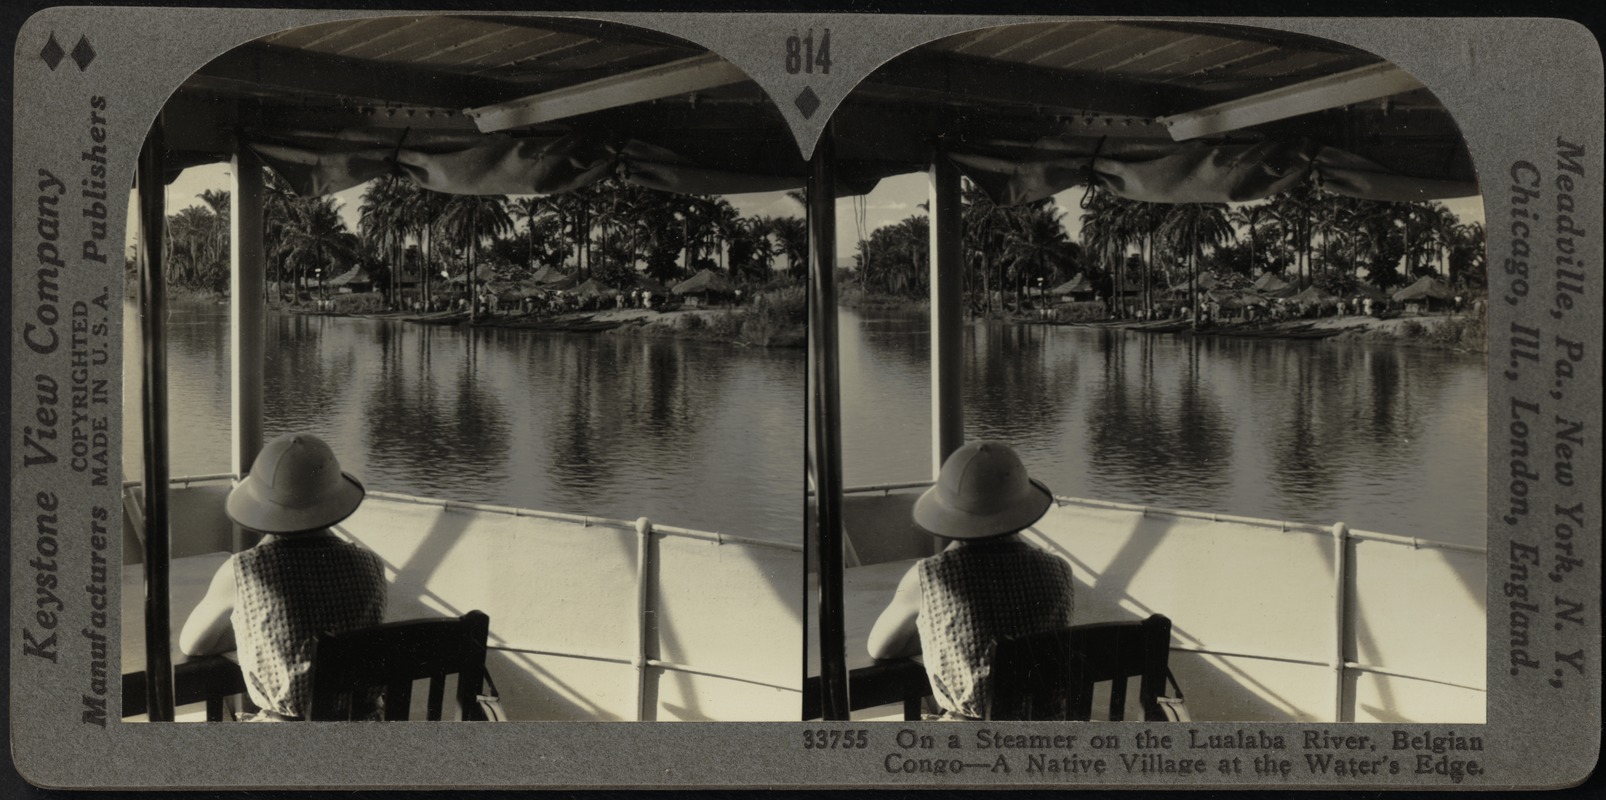 From a steamer on the Lualaba River, Belgian Congo